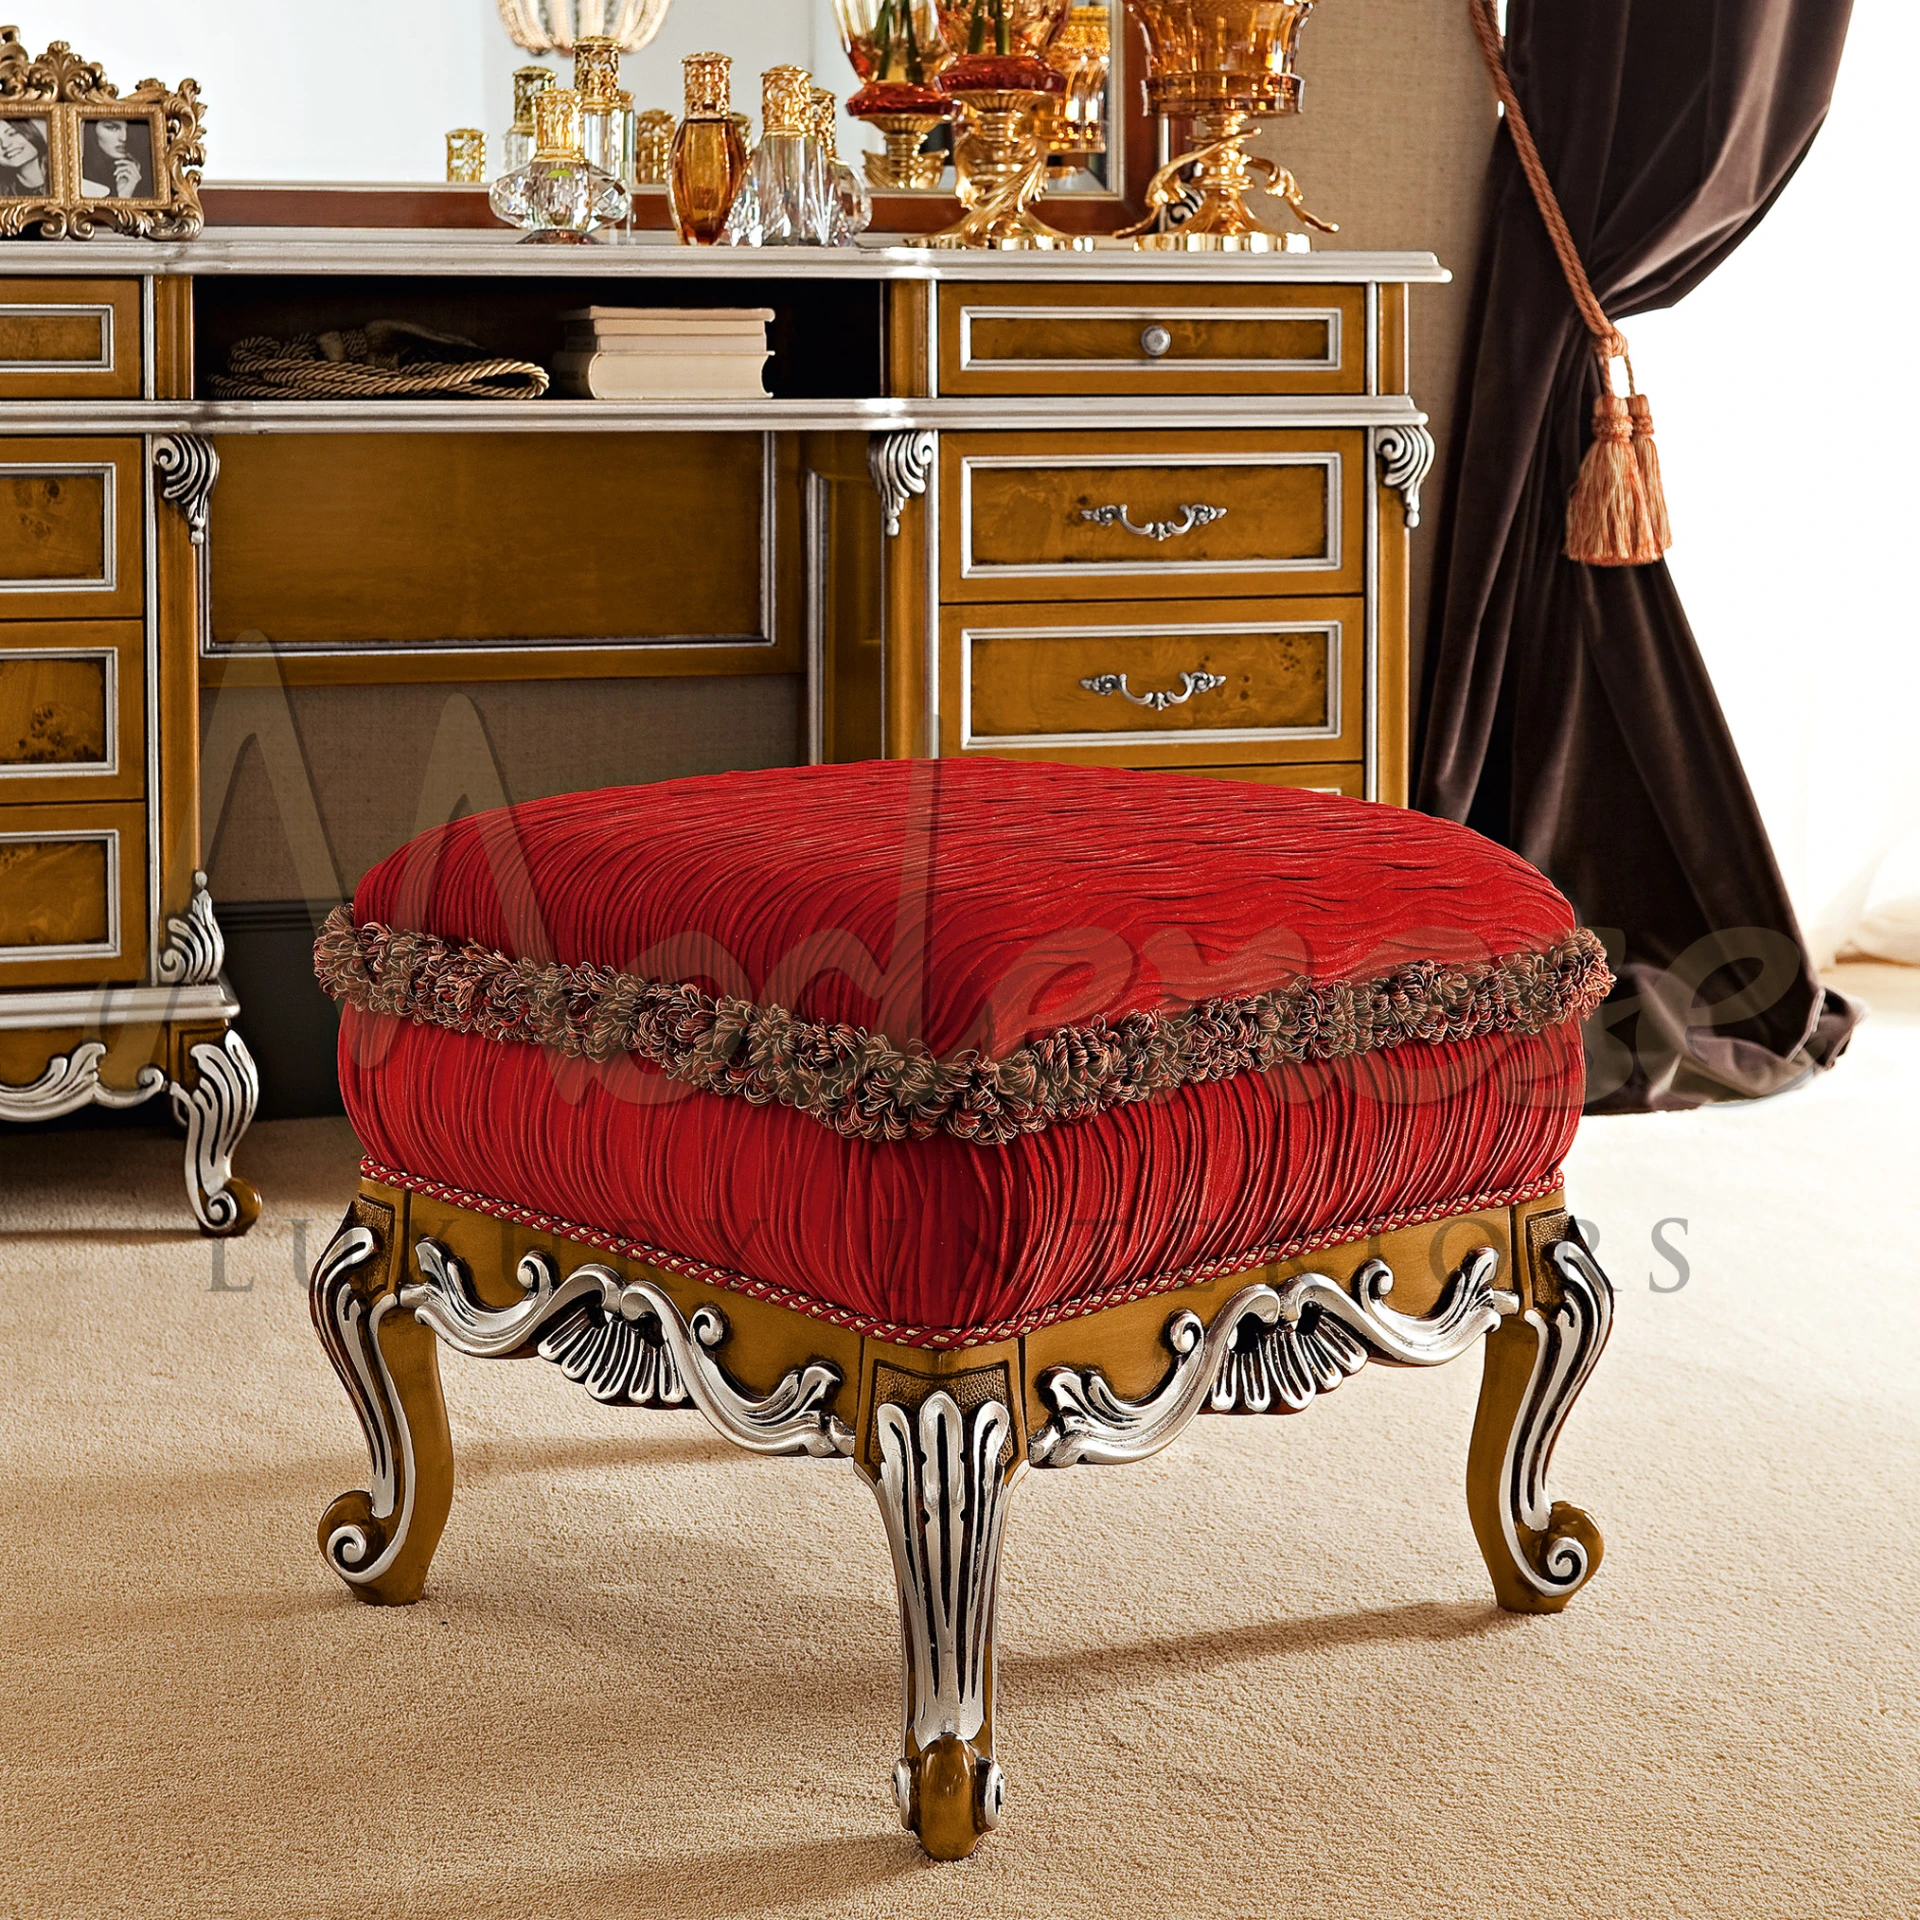 Opulent crimson velvet pouf with intricate gold carvings and a tasseled fringe                                                                        